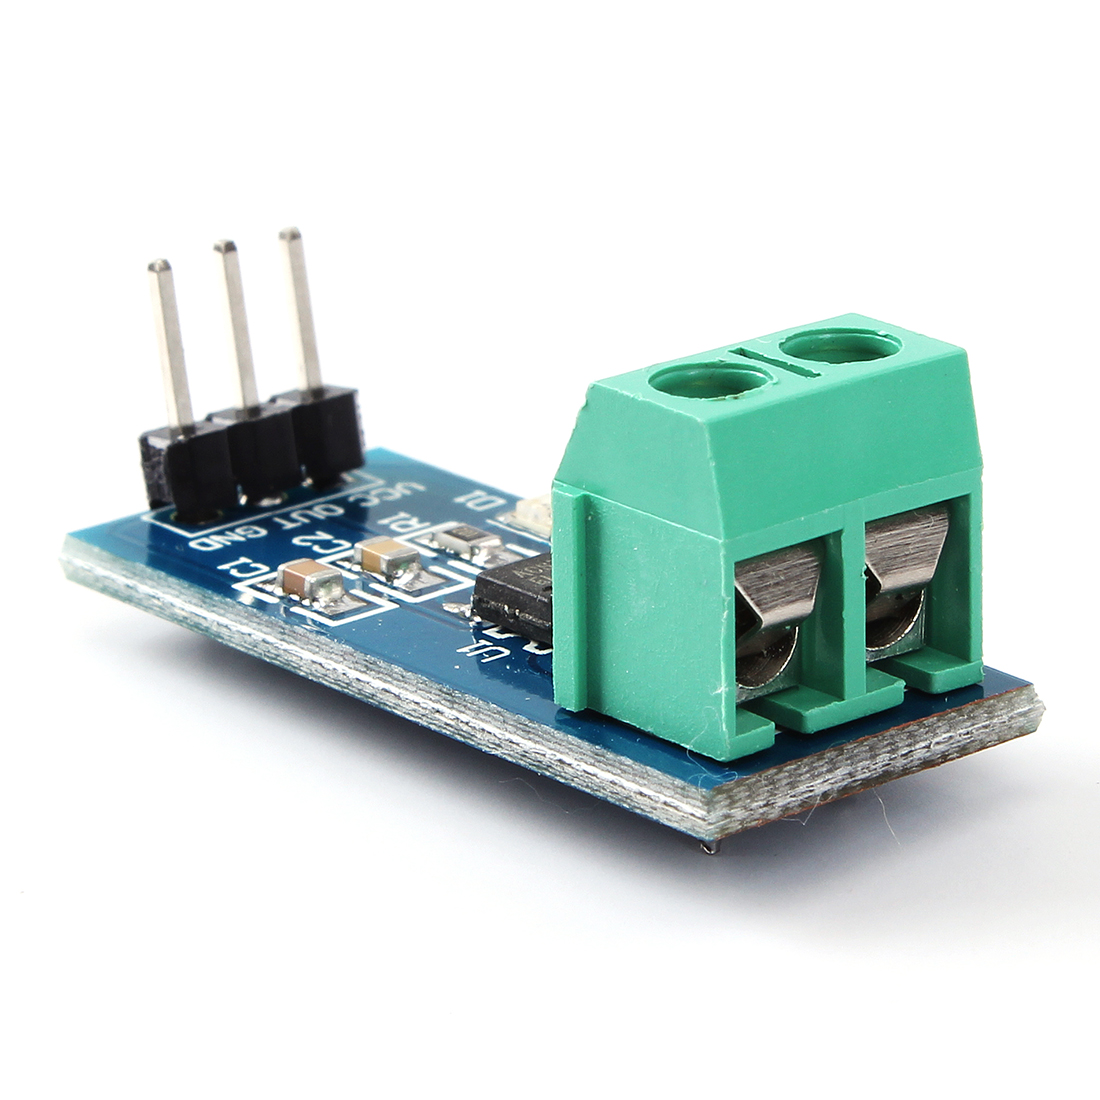 3Pcs-5V-30A-ACS712-Ranging-Current-Sensor-Module-Board-Geekcreit-for-Arduino---products-that-work-wi-980106